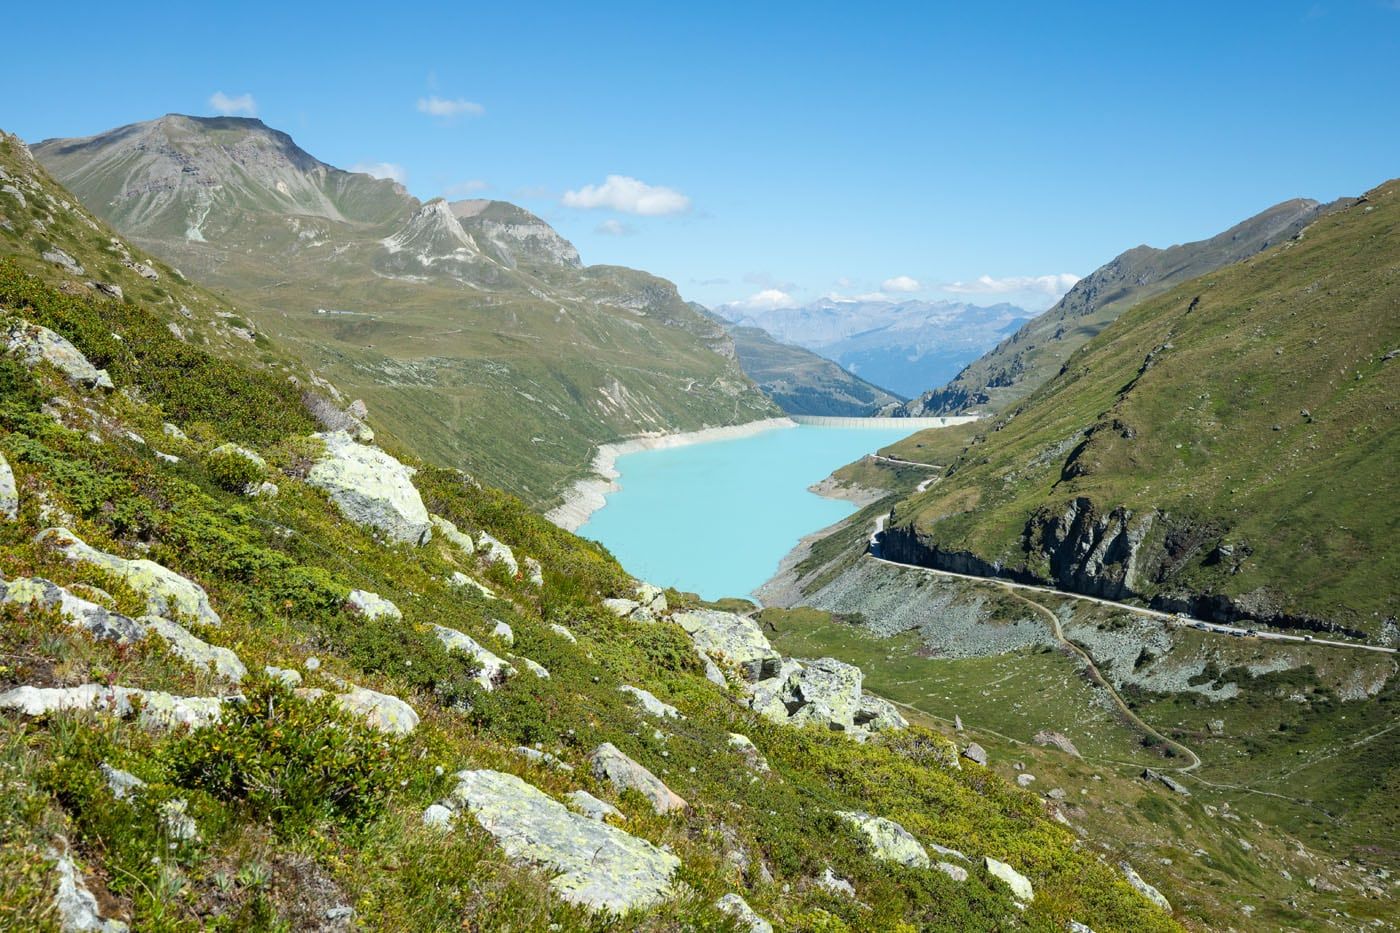 First View of Lac de Moiry